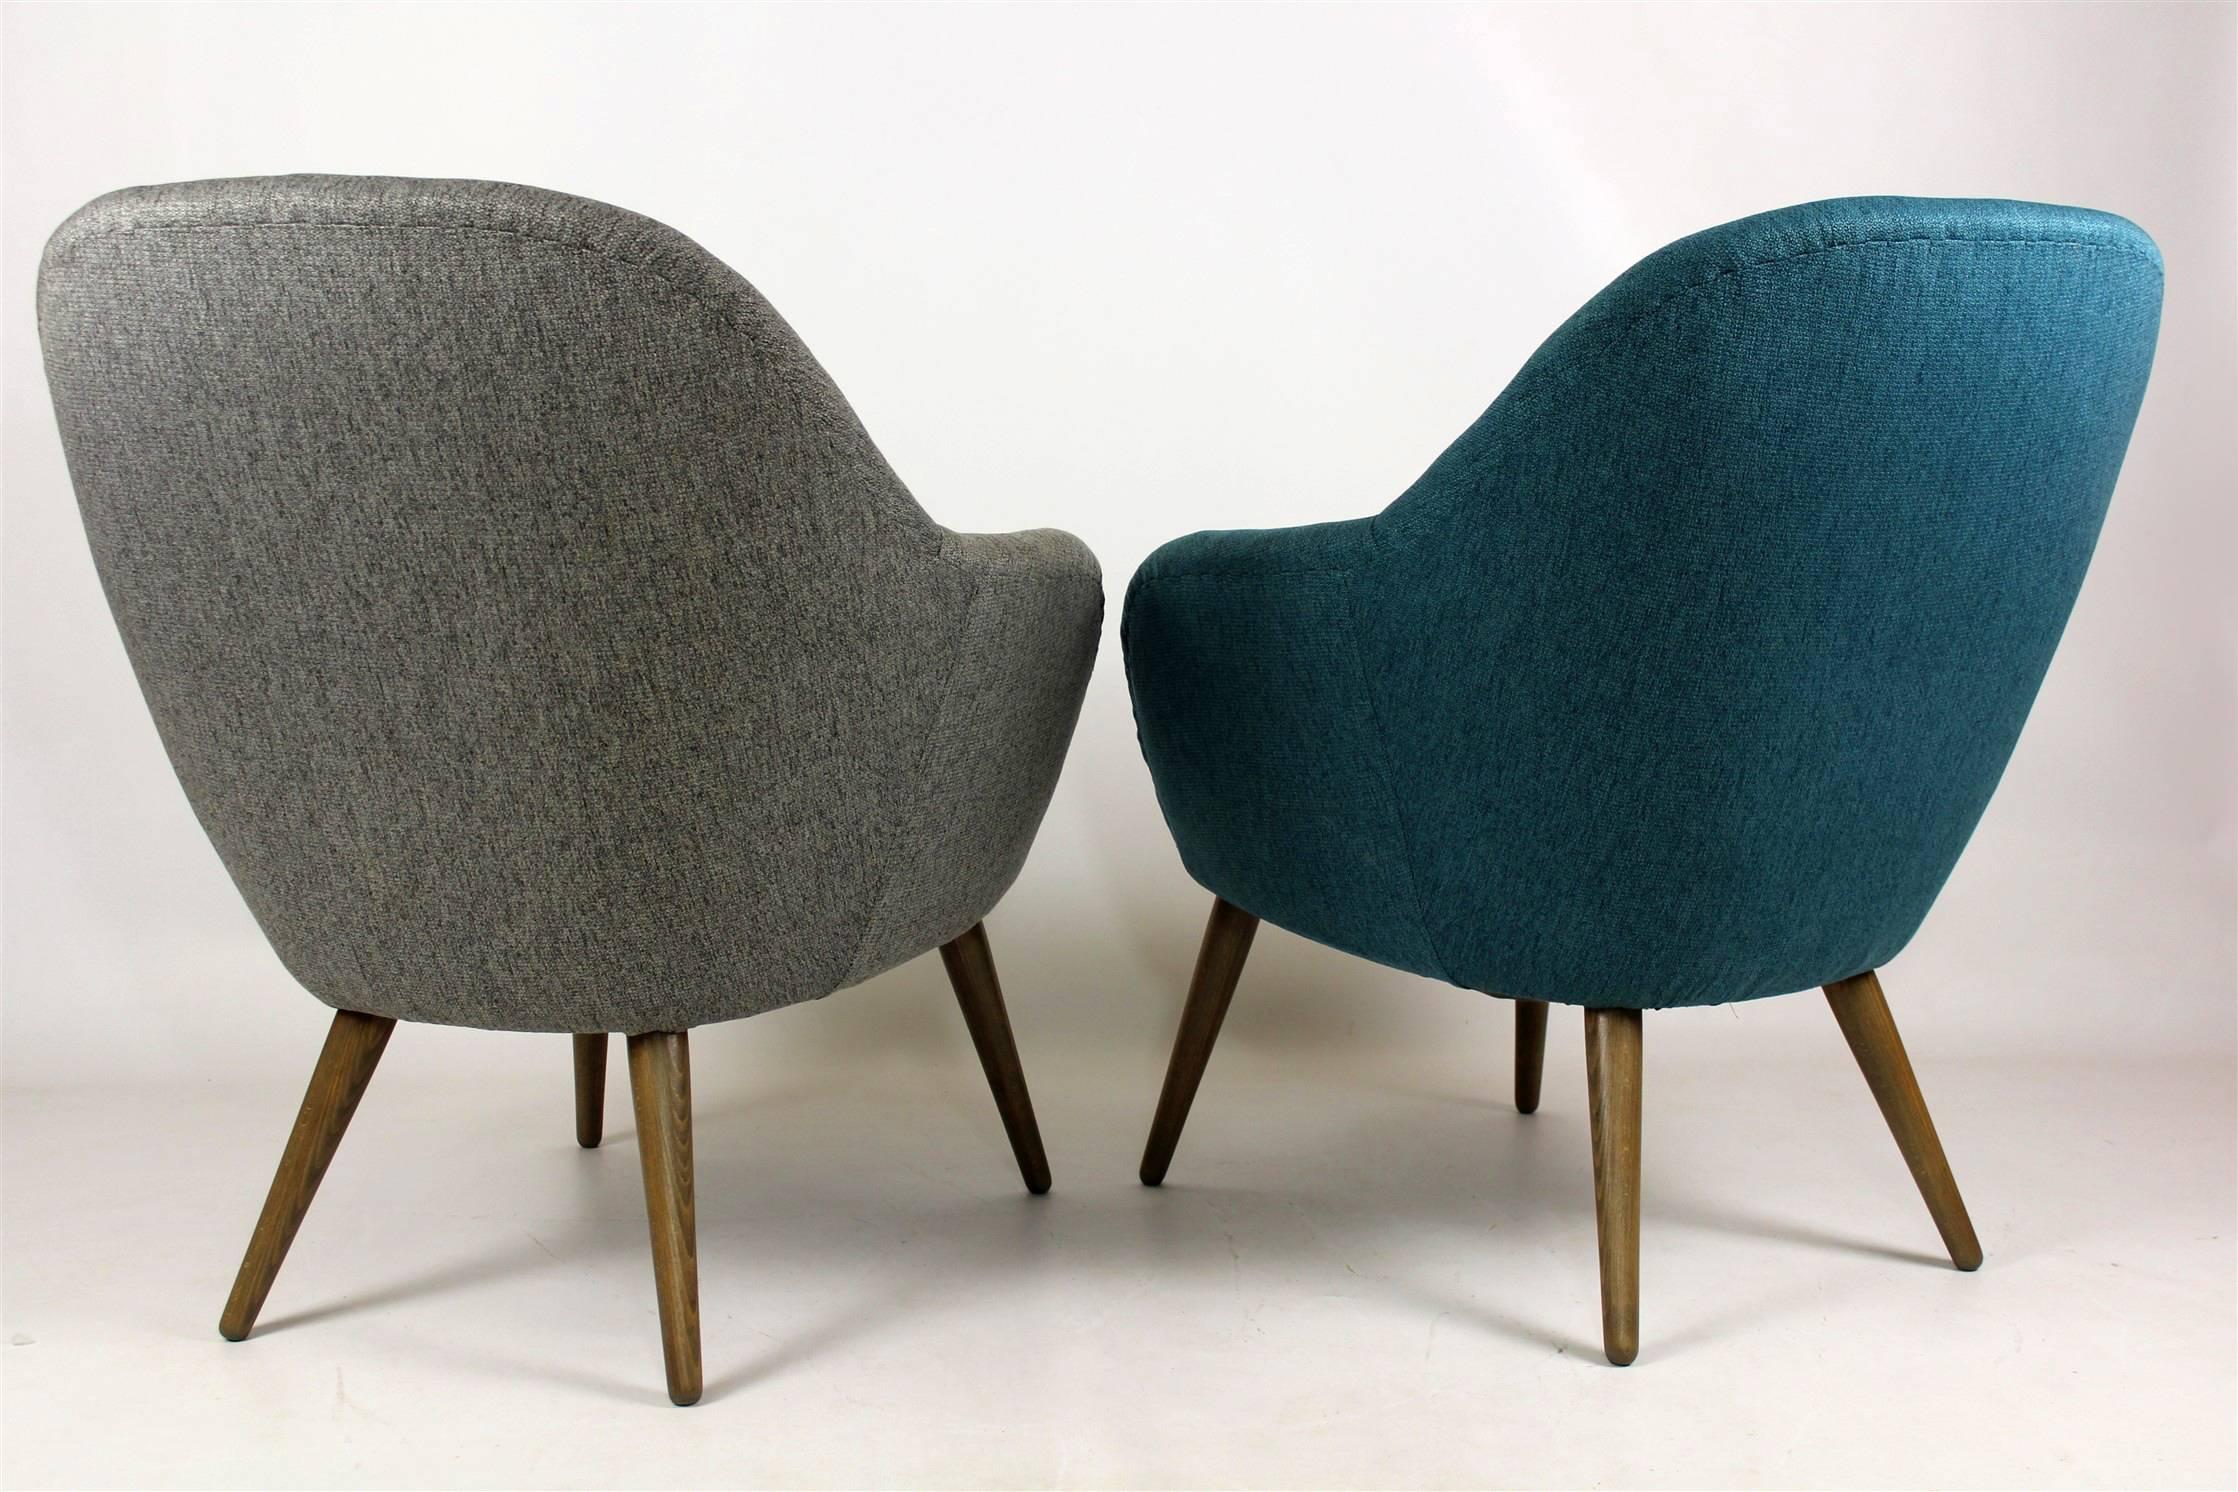 Pair of mid-century armchairs, produced in the late 1950s to early 1960s.
Made of wood, feature springed seats. Completely restored, satin lacquered woodwork, upholstered in grey and turquoise fabric.

